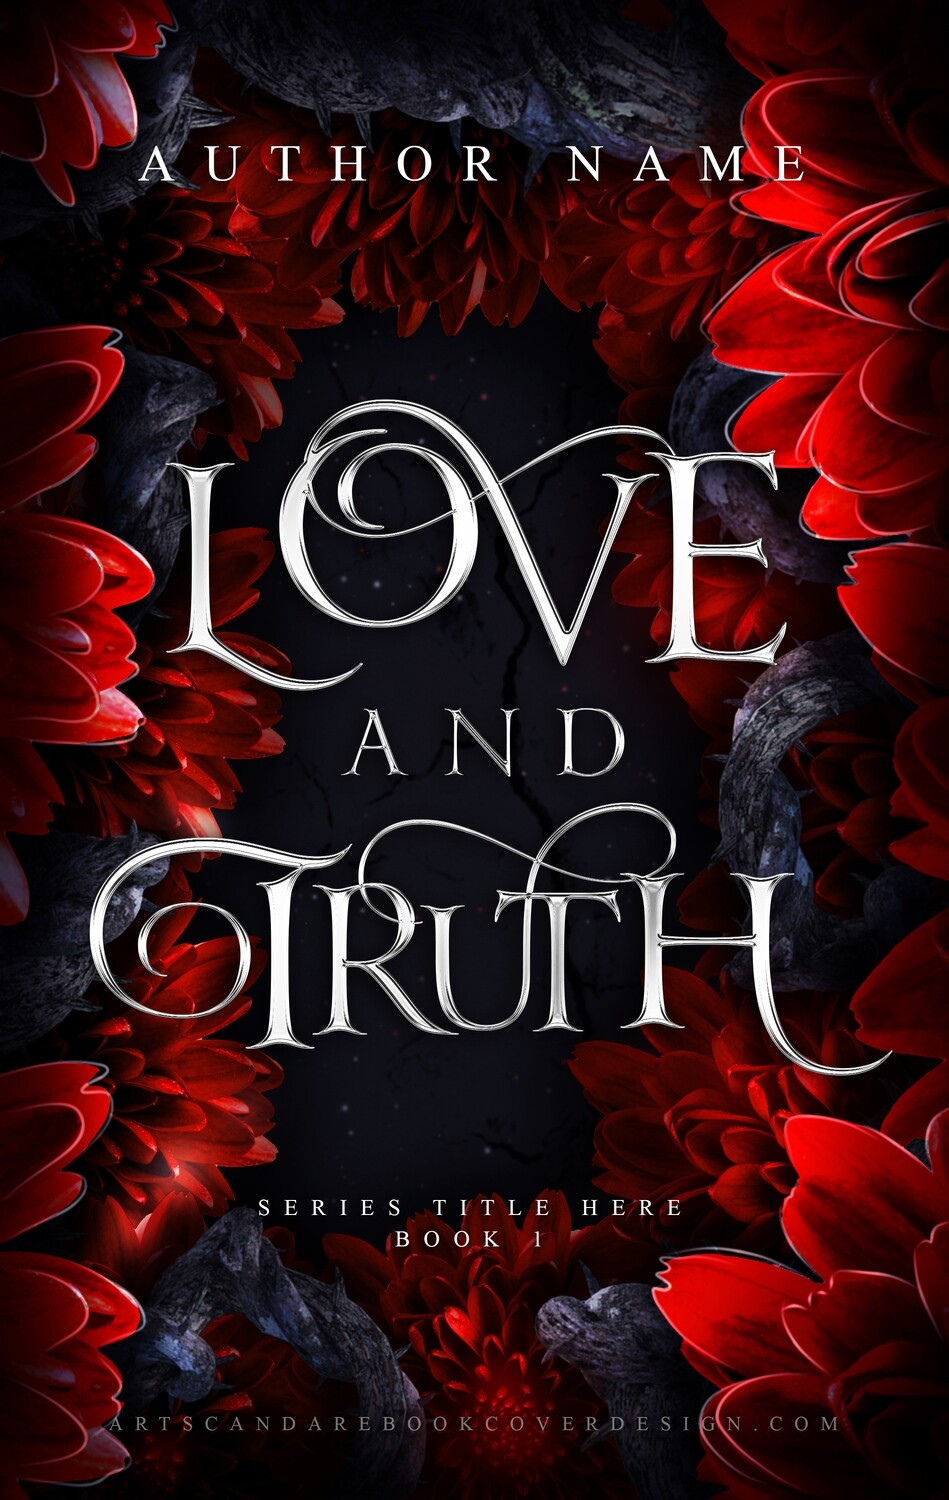 LOVE AND TRUTH